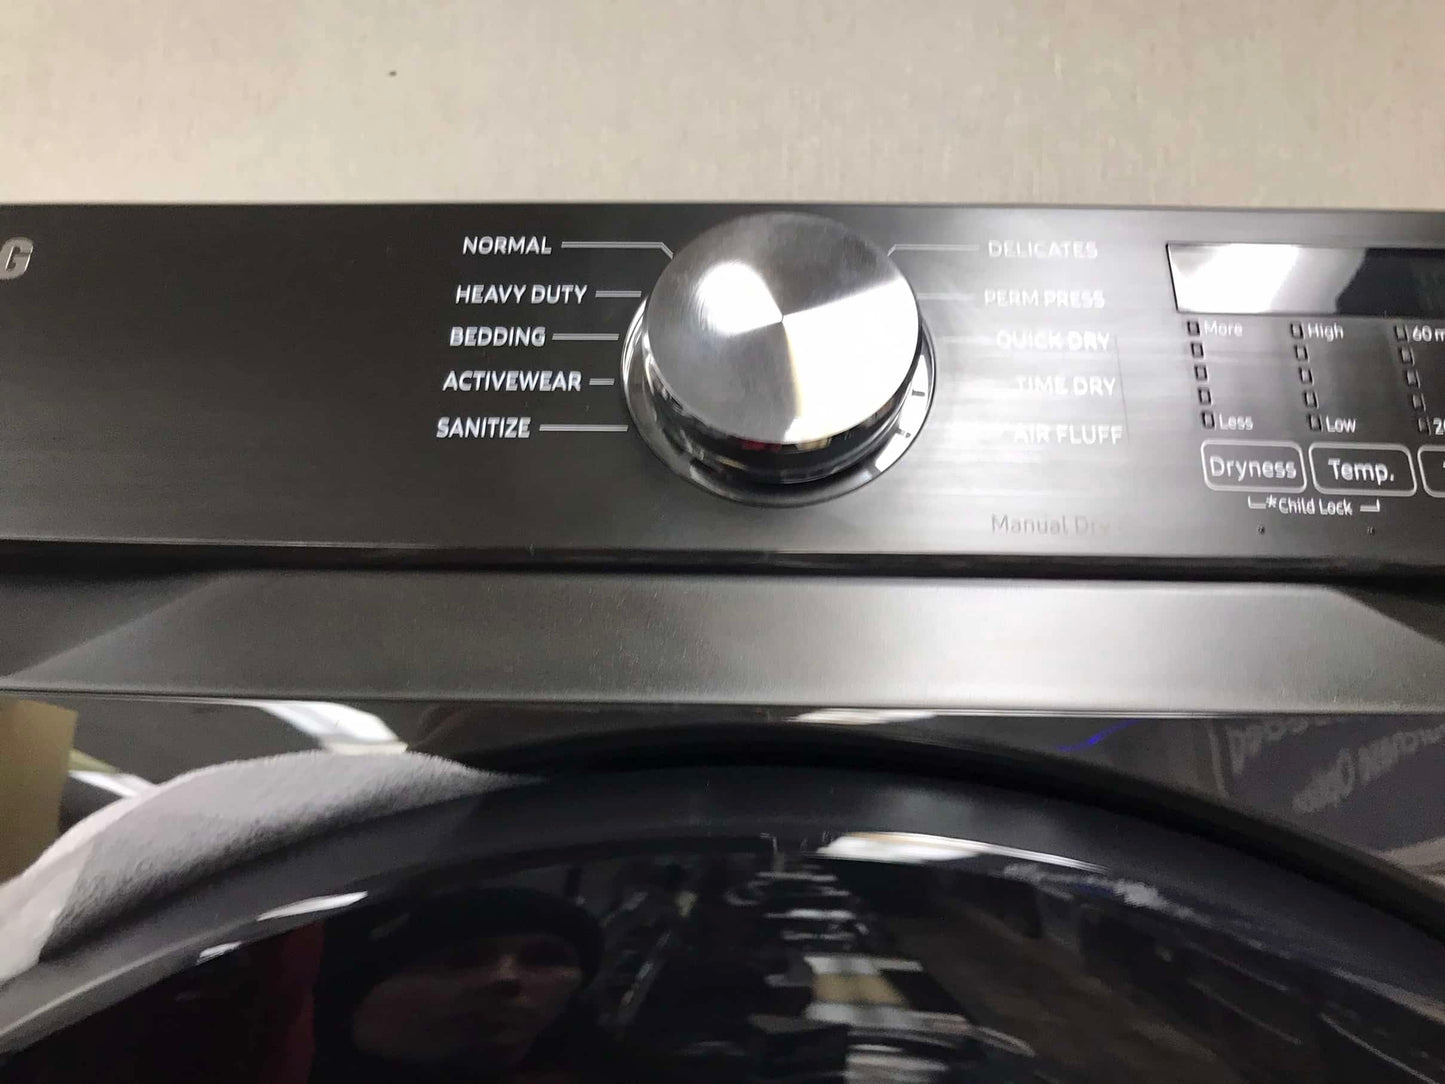 🔥 HOT DEAL ★ Samsung Open Box 4.5 cu. ft. Smart High-Efficiency Front Load Washer with Super Speed  & 7.5 cu. ft. Smart Stackable Vented ELECTRIC Dryer with Steam Sanitize+ in champagne 27 in WD2198